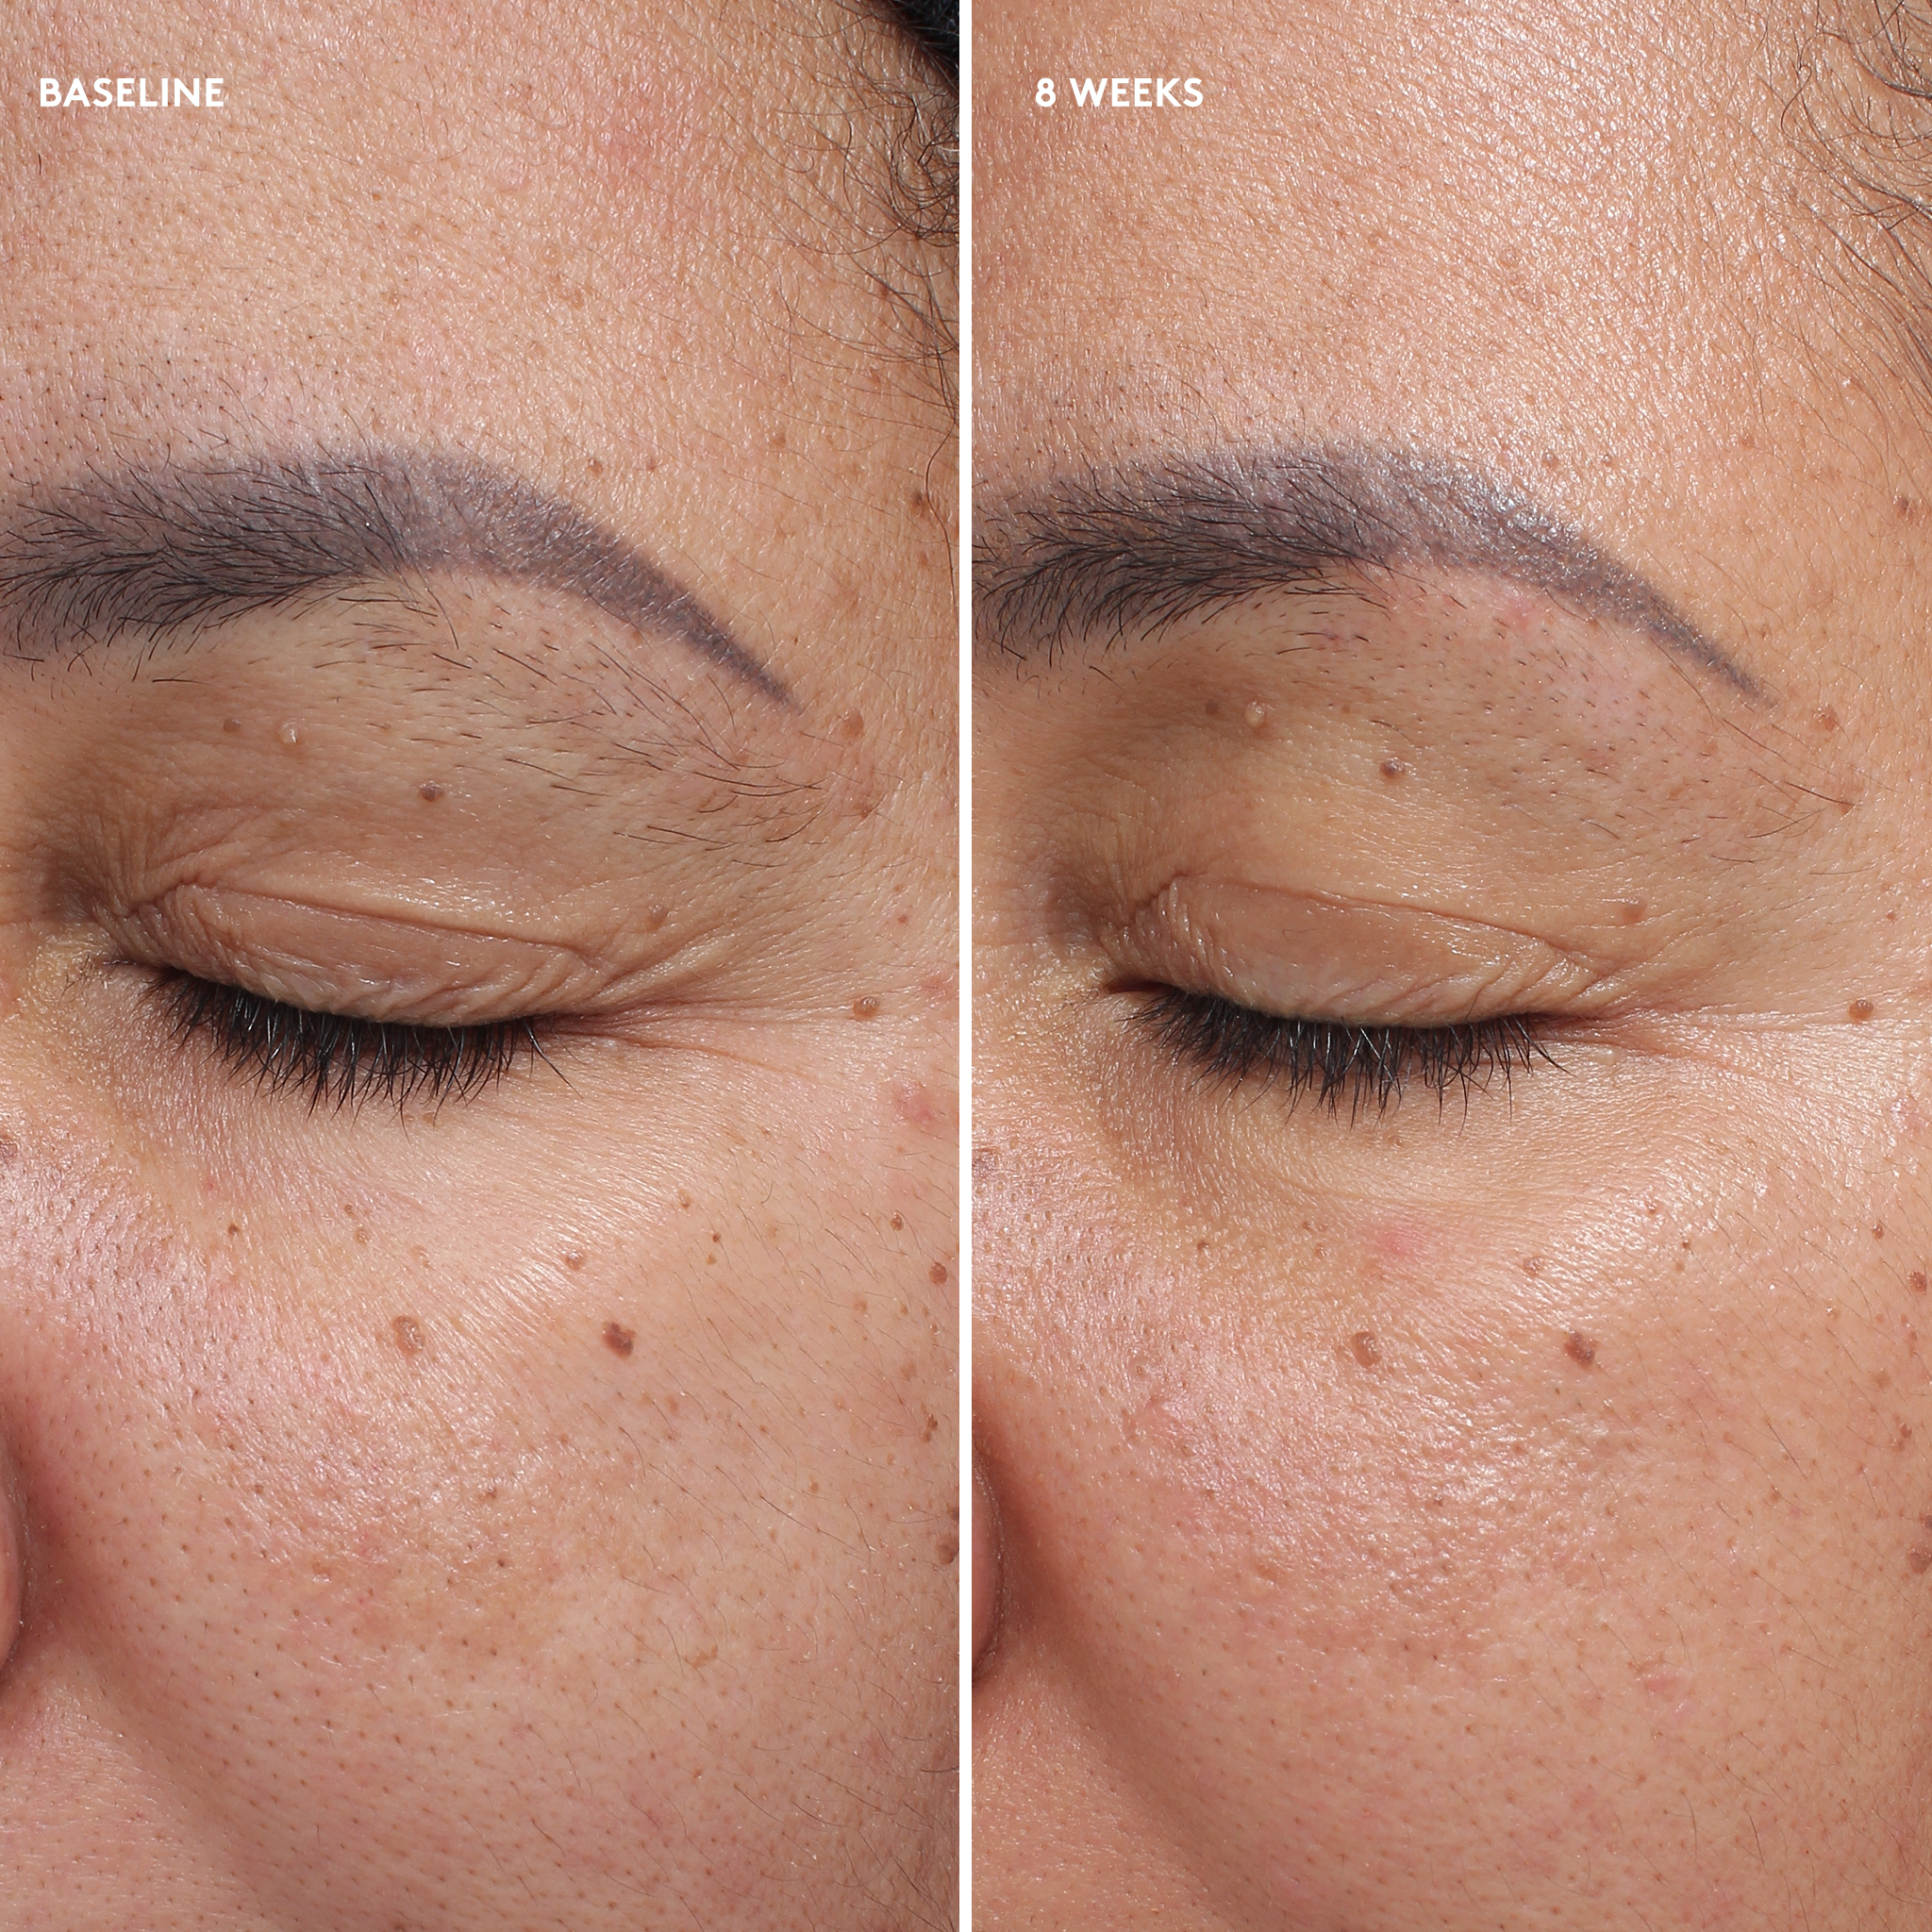 before and after of woman's eyes at baseline and week 8 || all